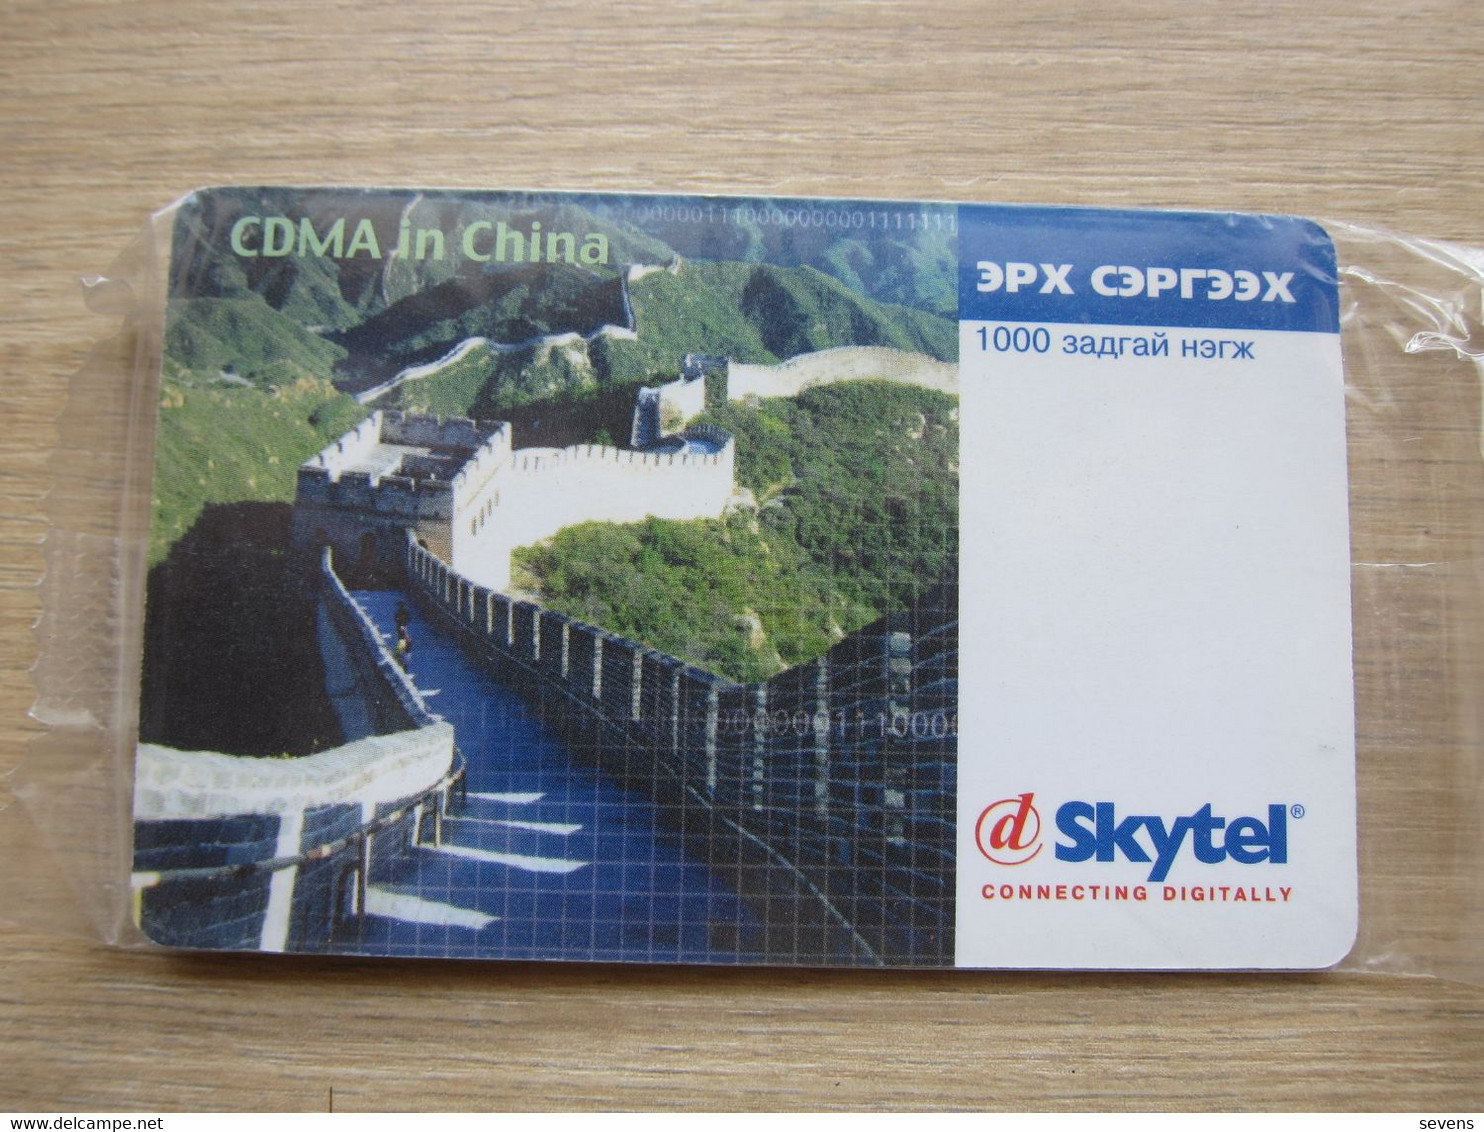 Skytel CDMA Prepaid Phonecard, The Great Wall, Mint In Blister Expired - Mongolei